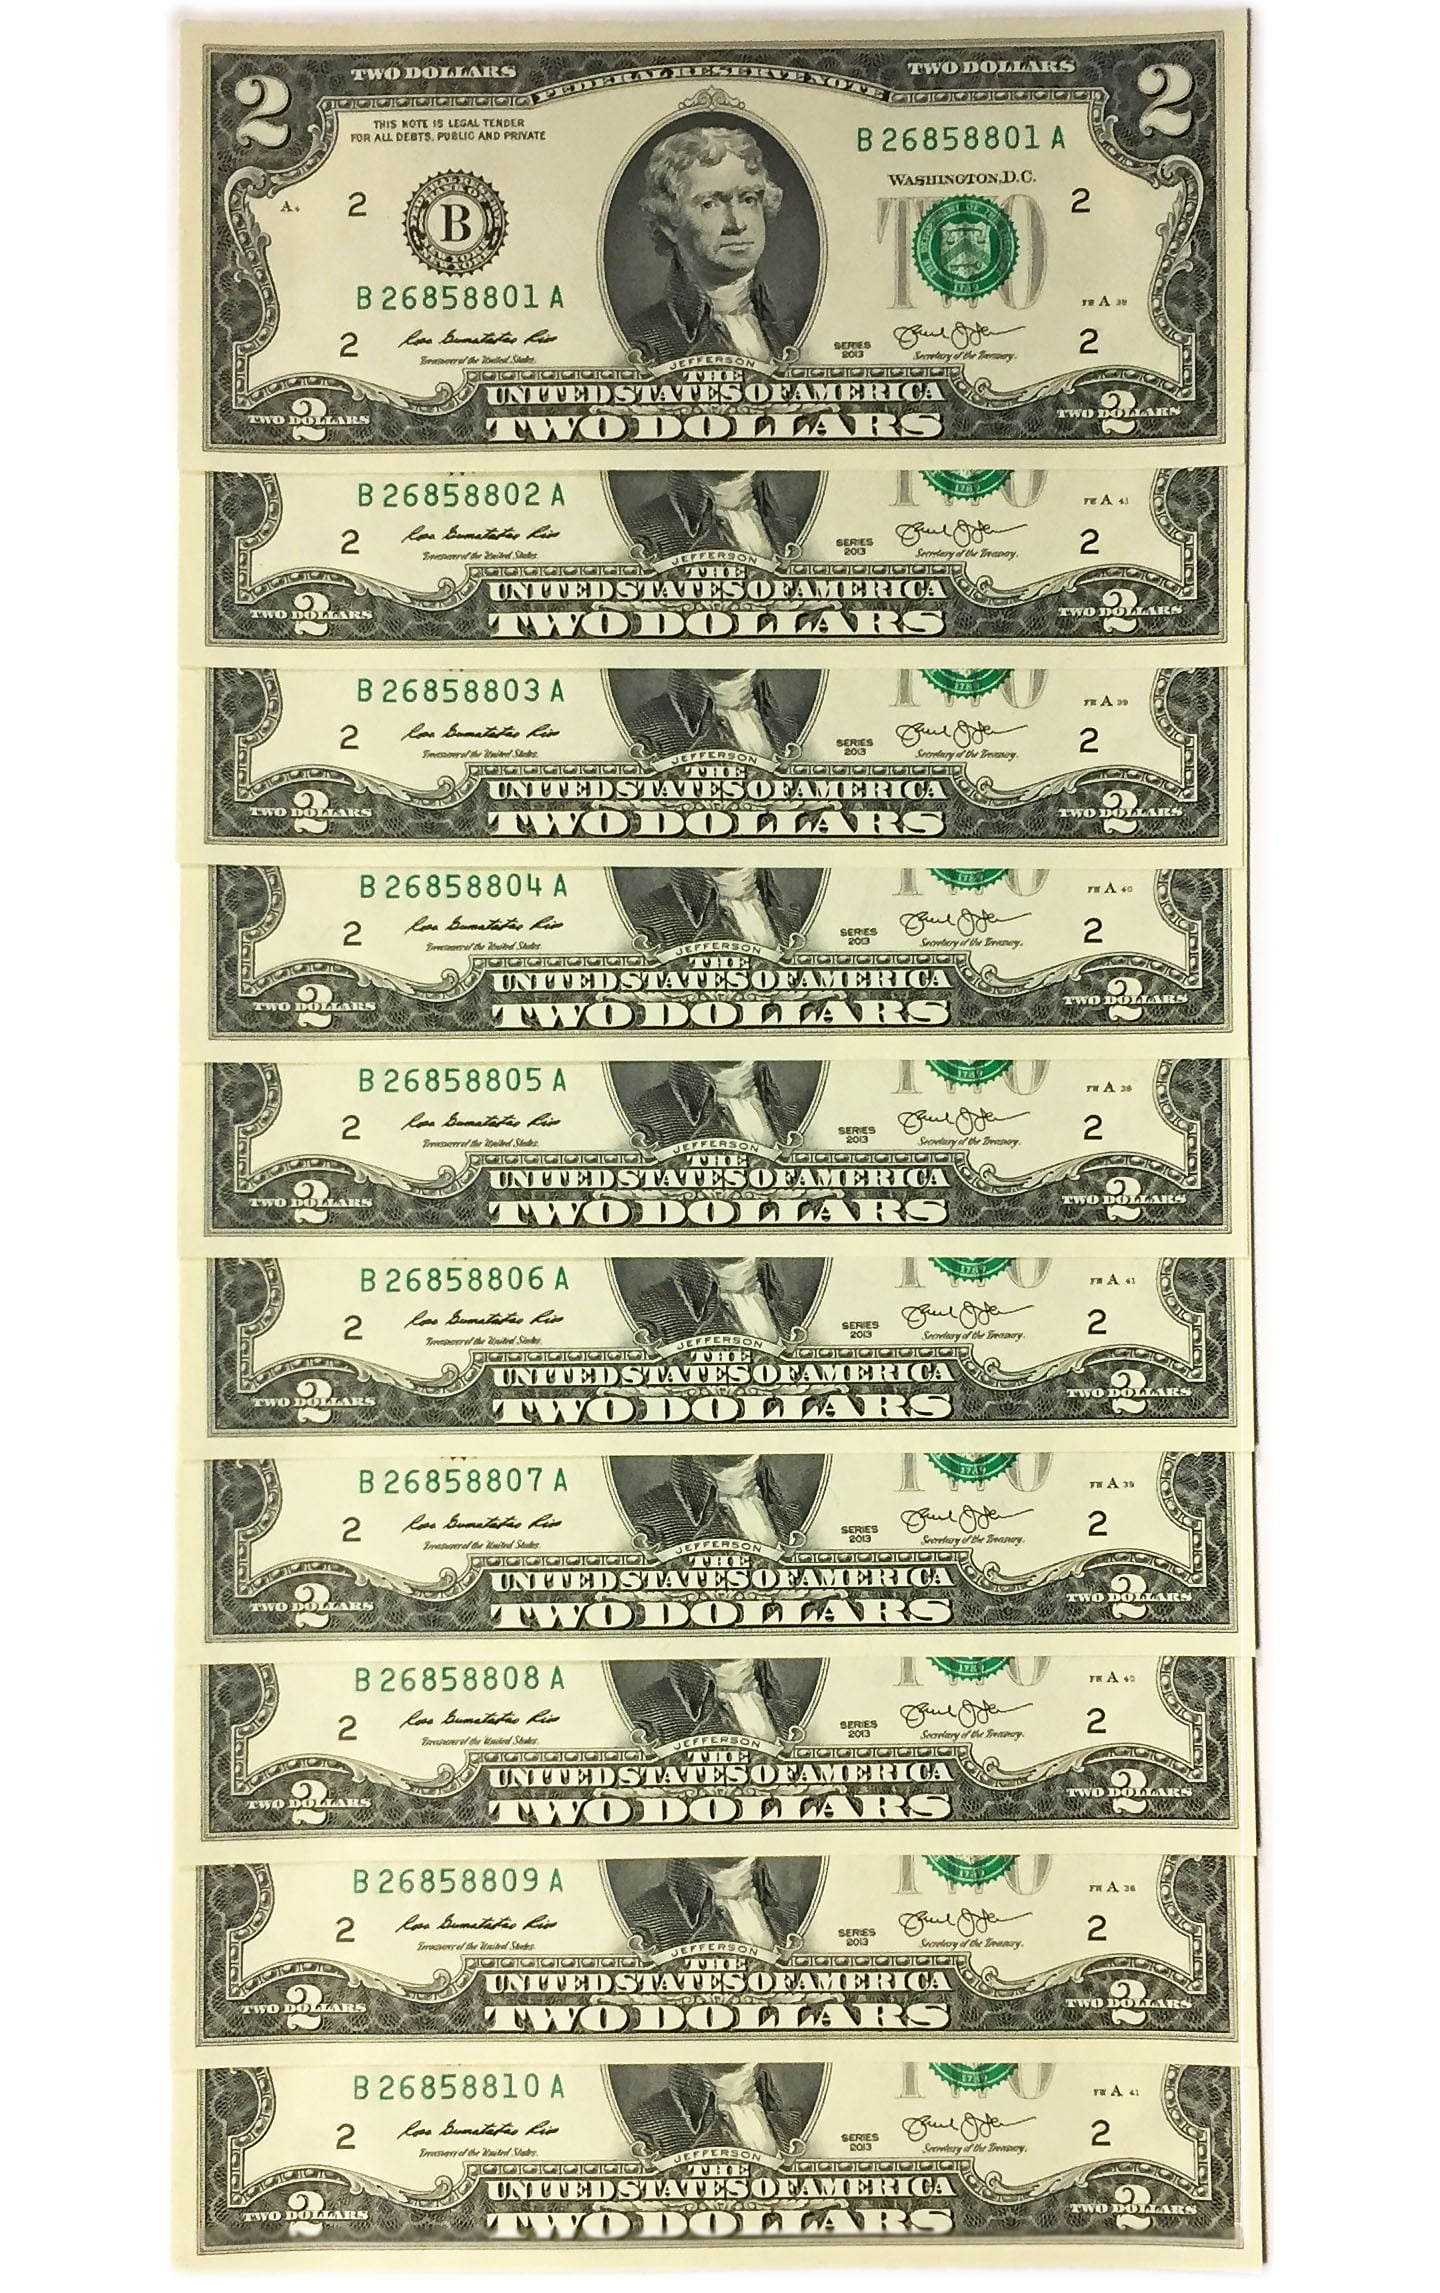 FREE SHIPPING FROM THE US 10 Uncirculated $2 Two Dollar bills Crisp notes VA 